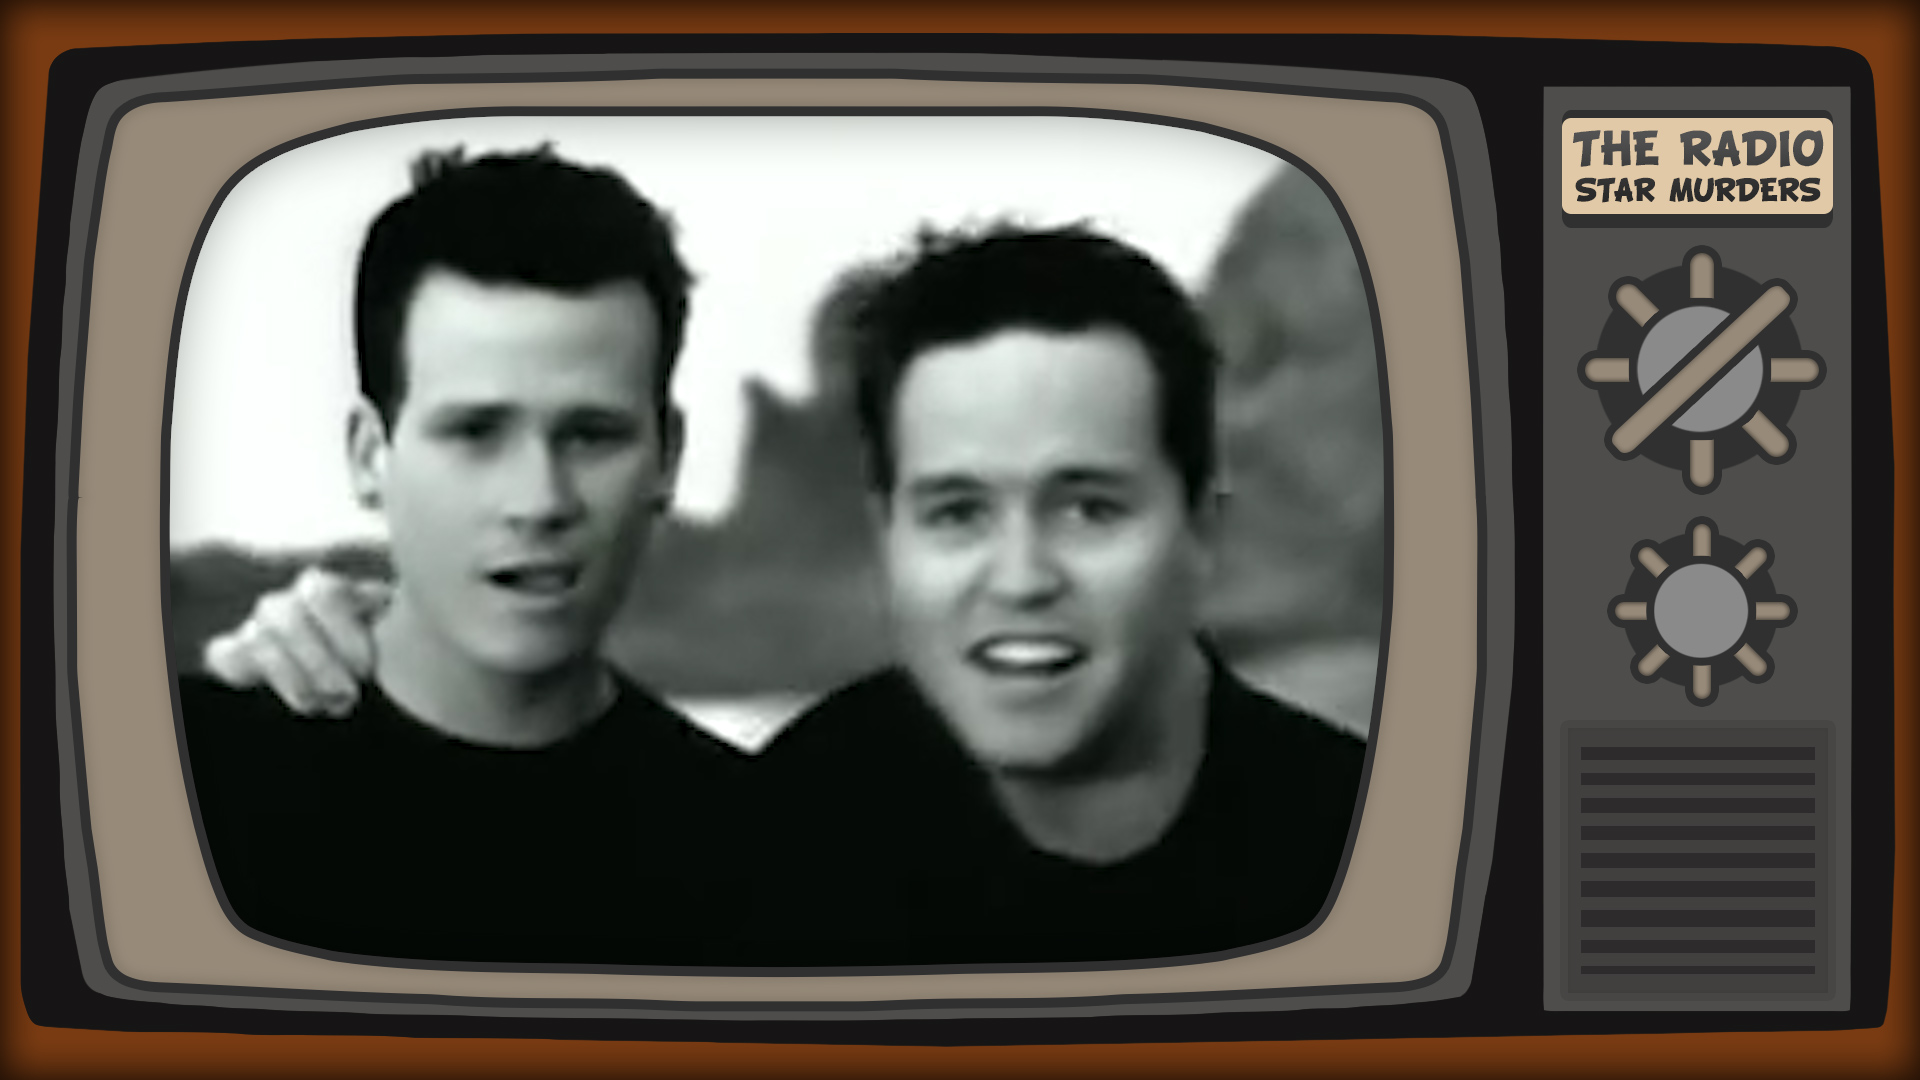 blink-182 – All the Small Things